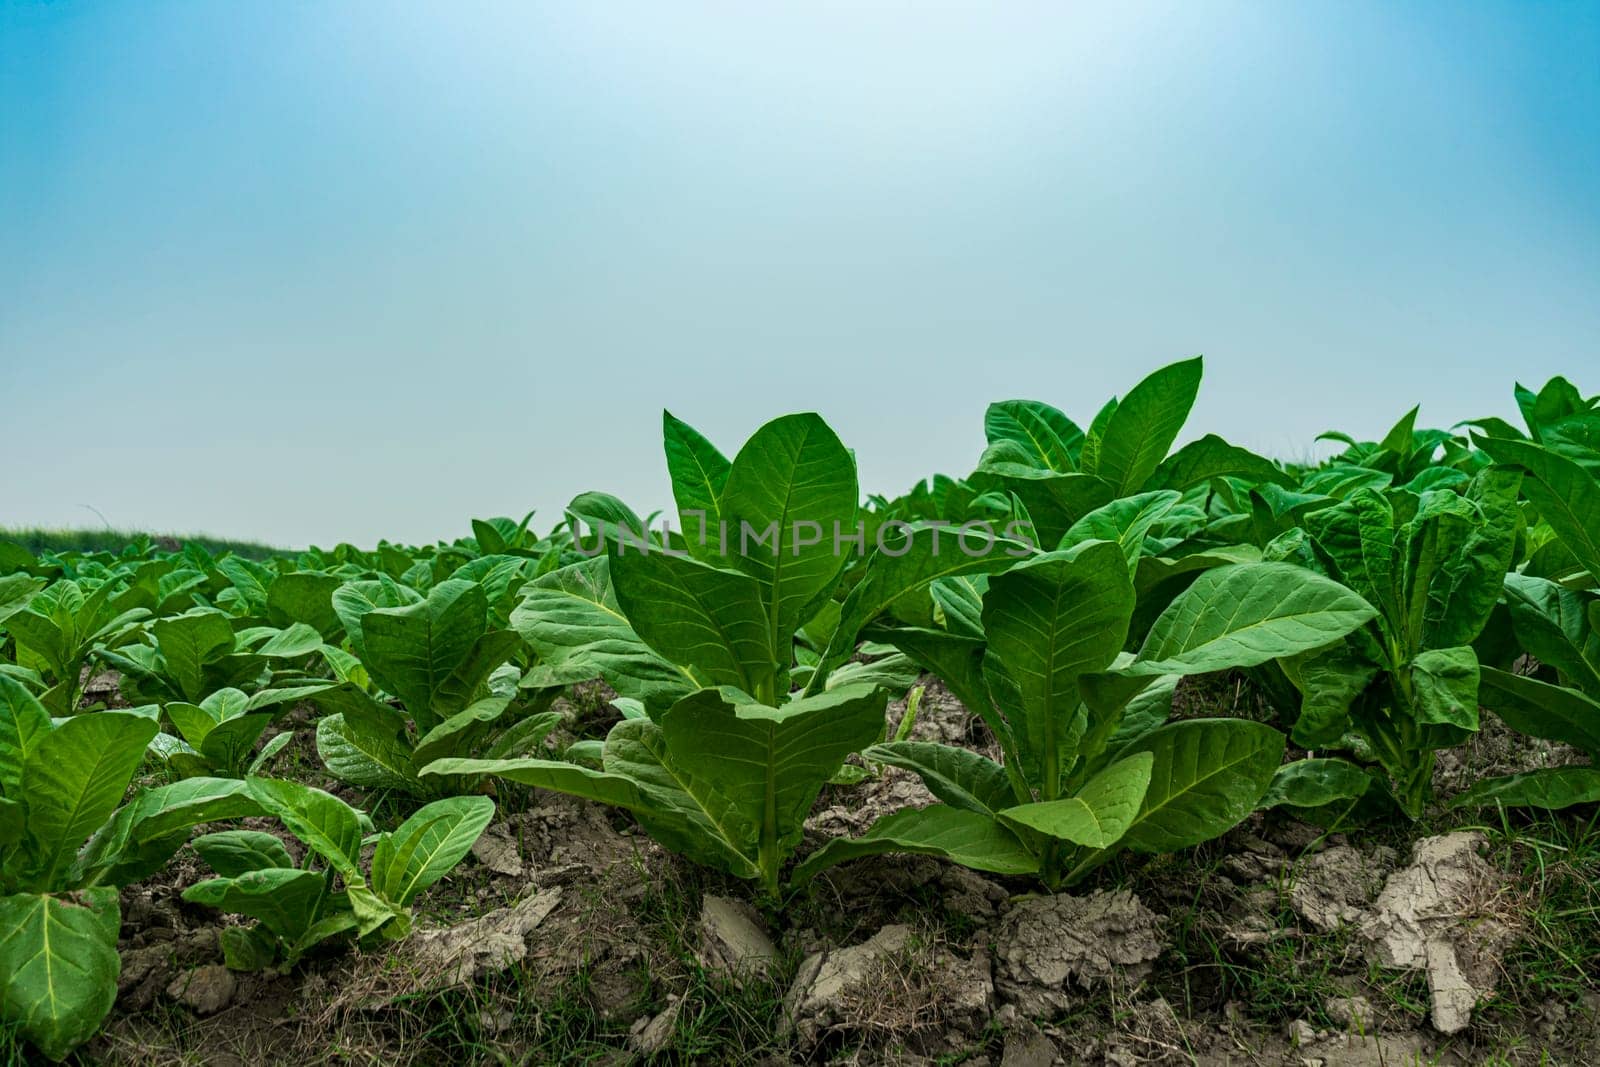 Lush young toback bushes. Field of tobacco. tobacco plantation, tobacco cultivation.